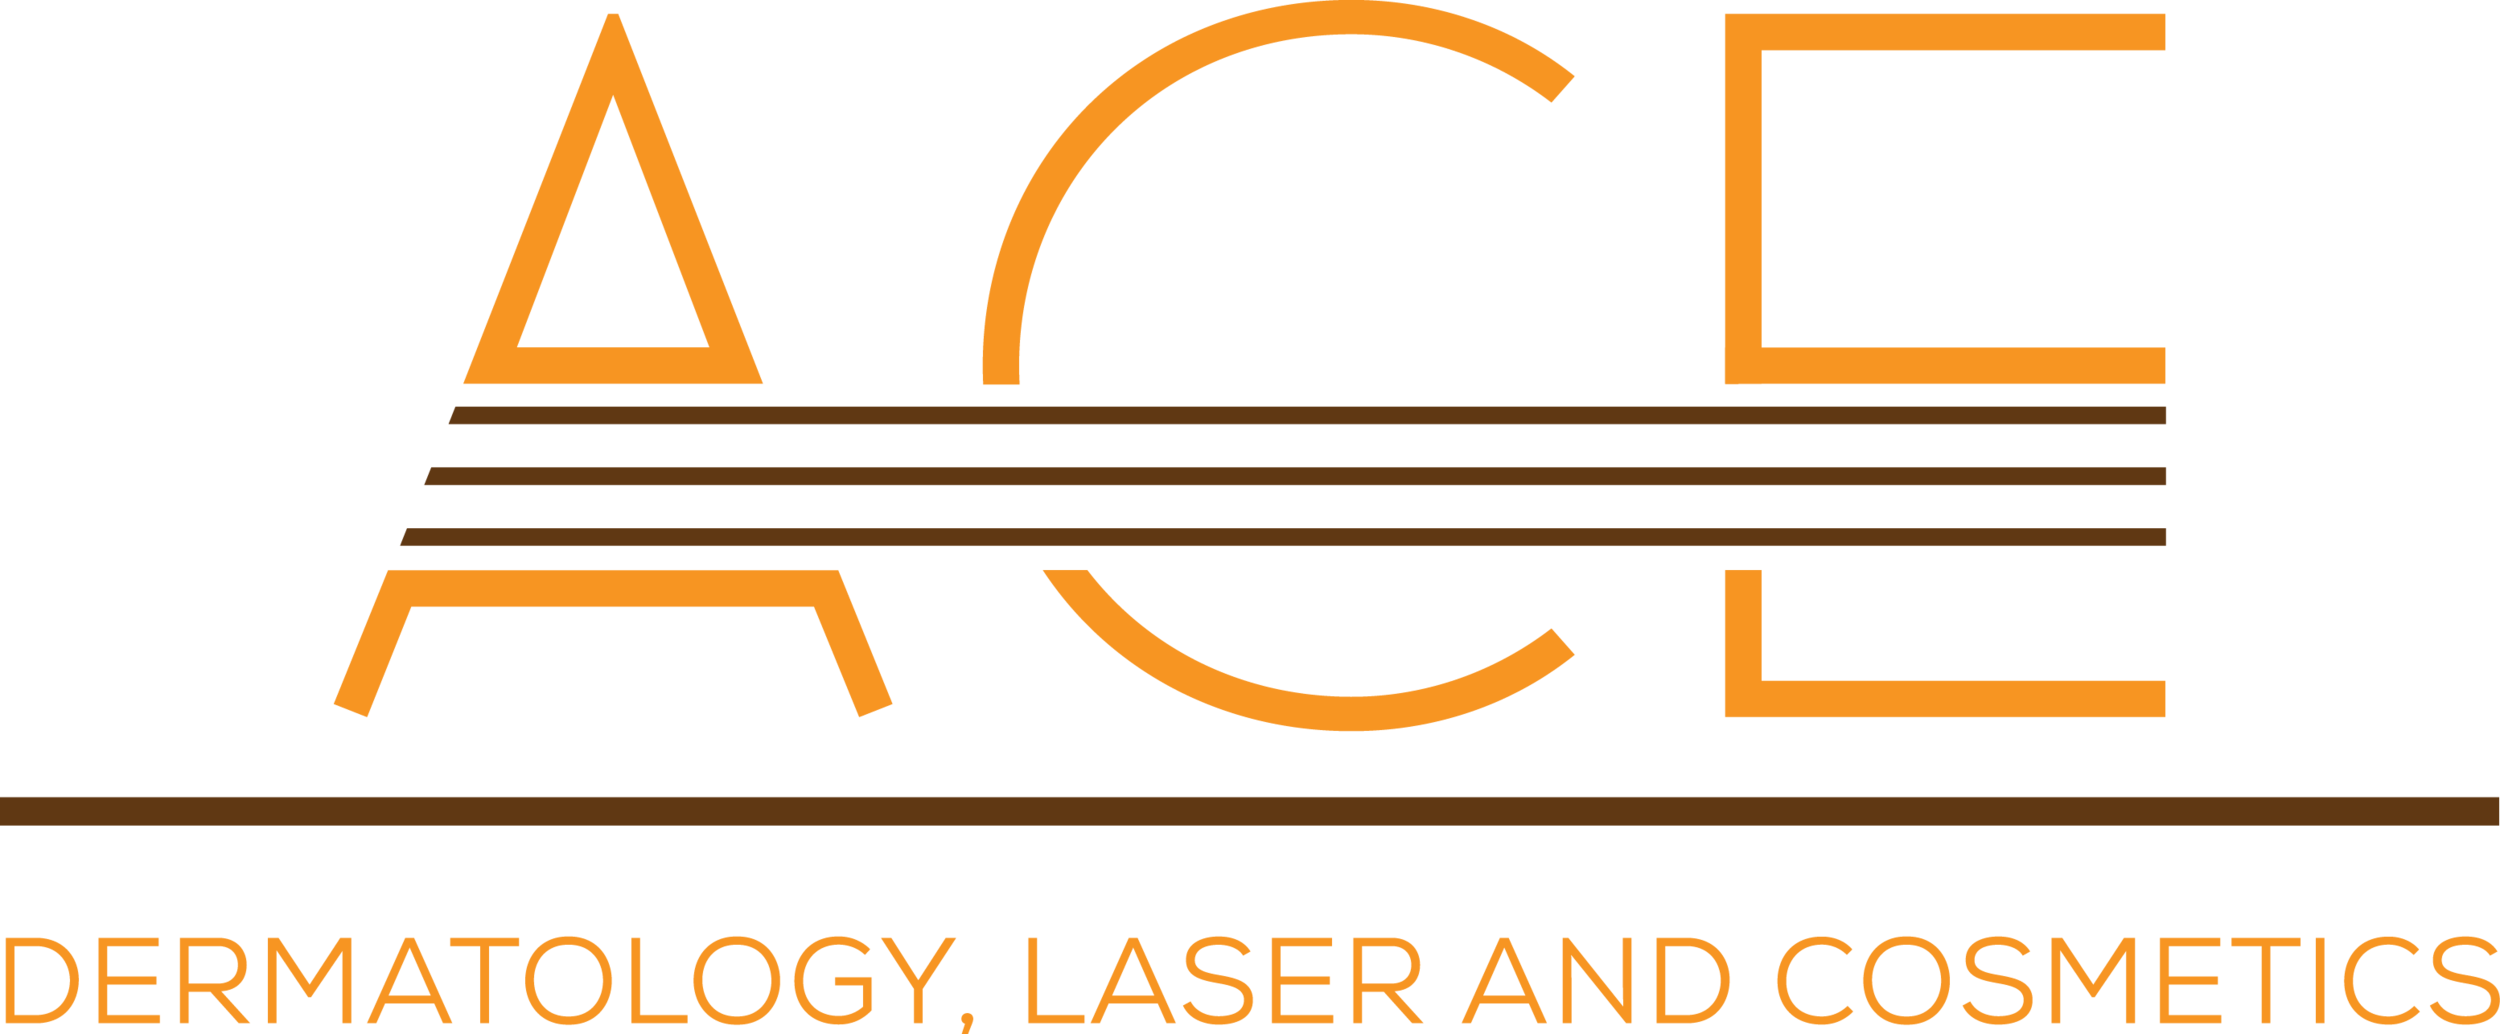 ACE Dermatology, Laser and Cosmetics